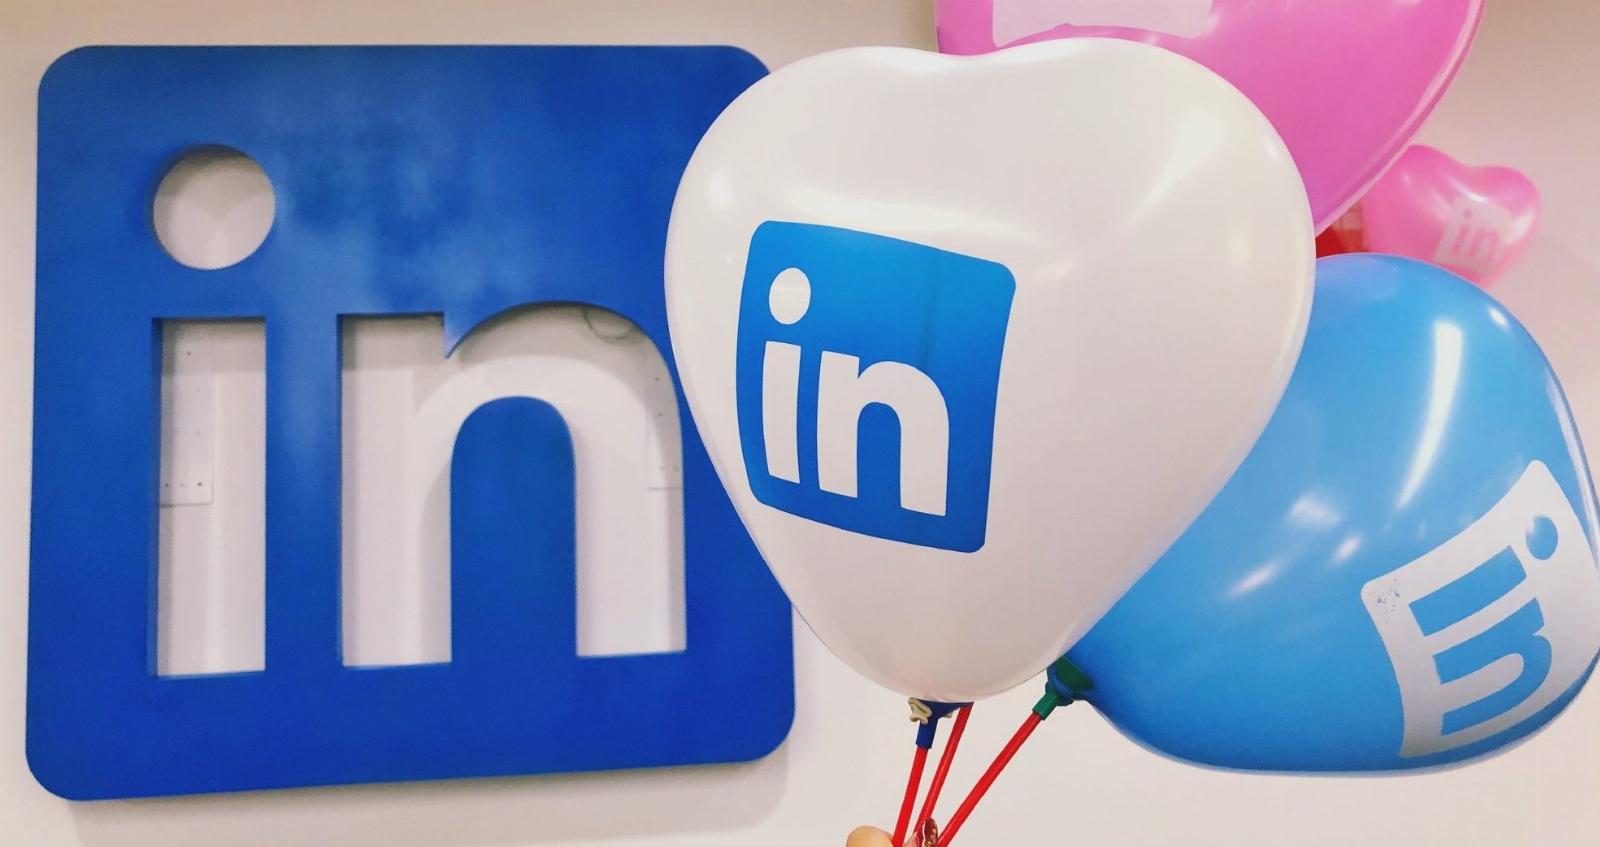 LinkedIn plans to add gaming to its platform